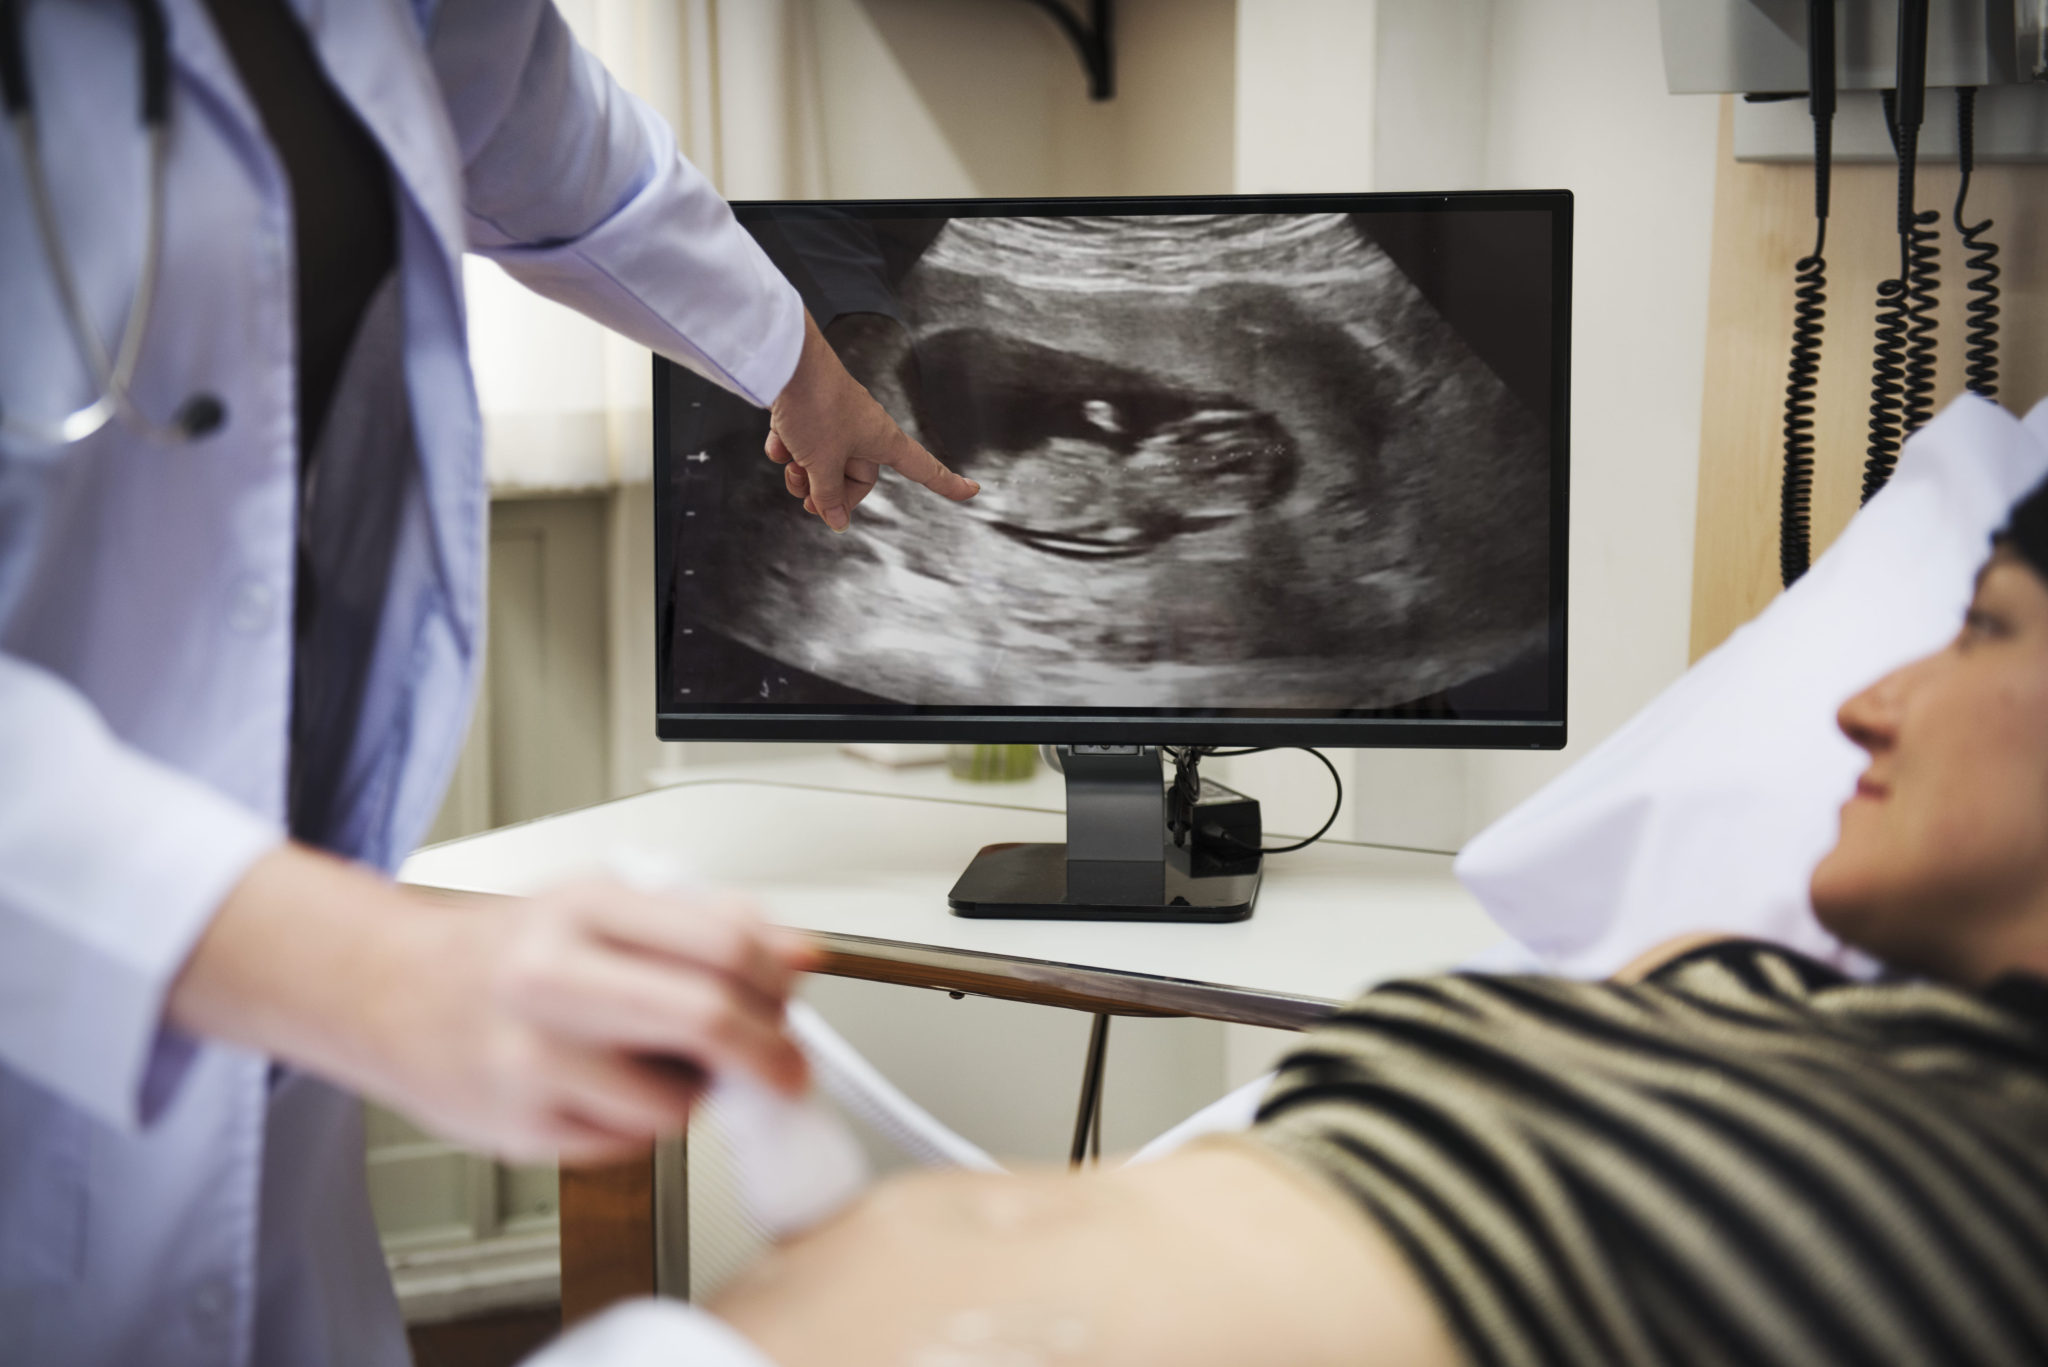 Differences Between A Diagnostic Ultrasound & An Elective Ultrasound